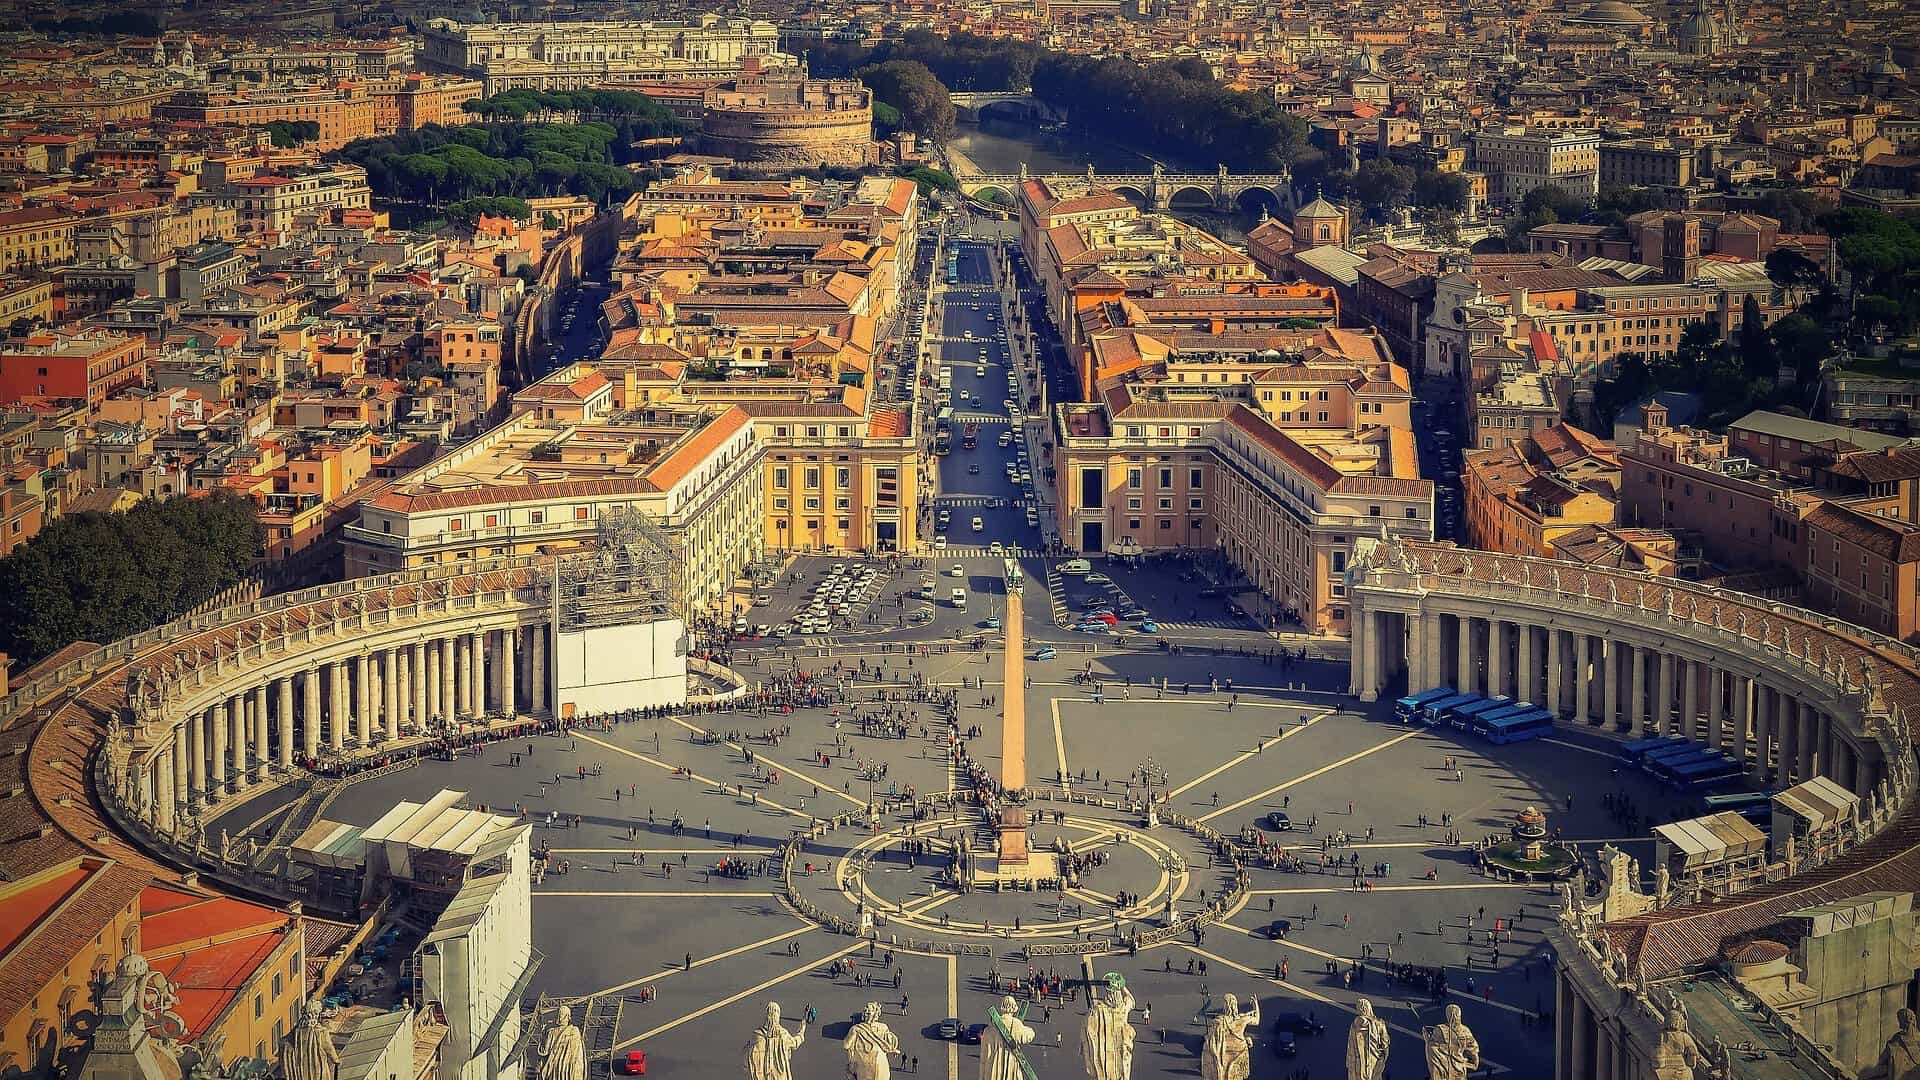 St. Peter's Square is seen from an aerial view.